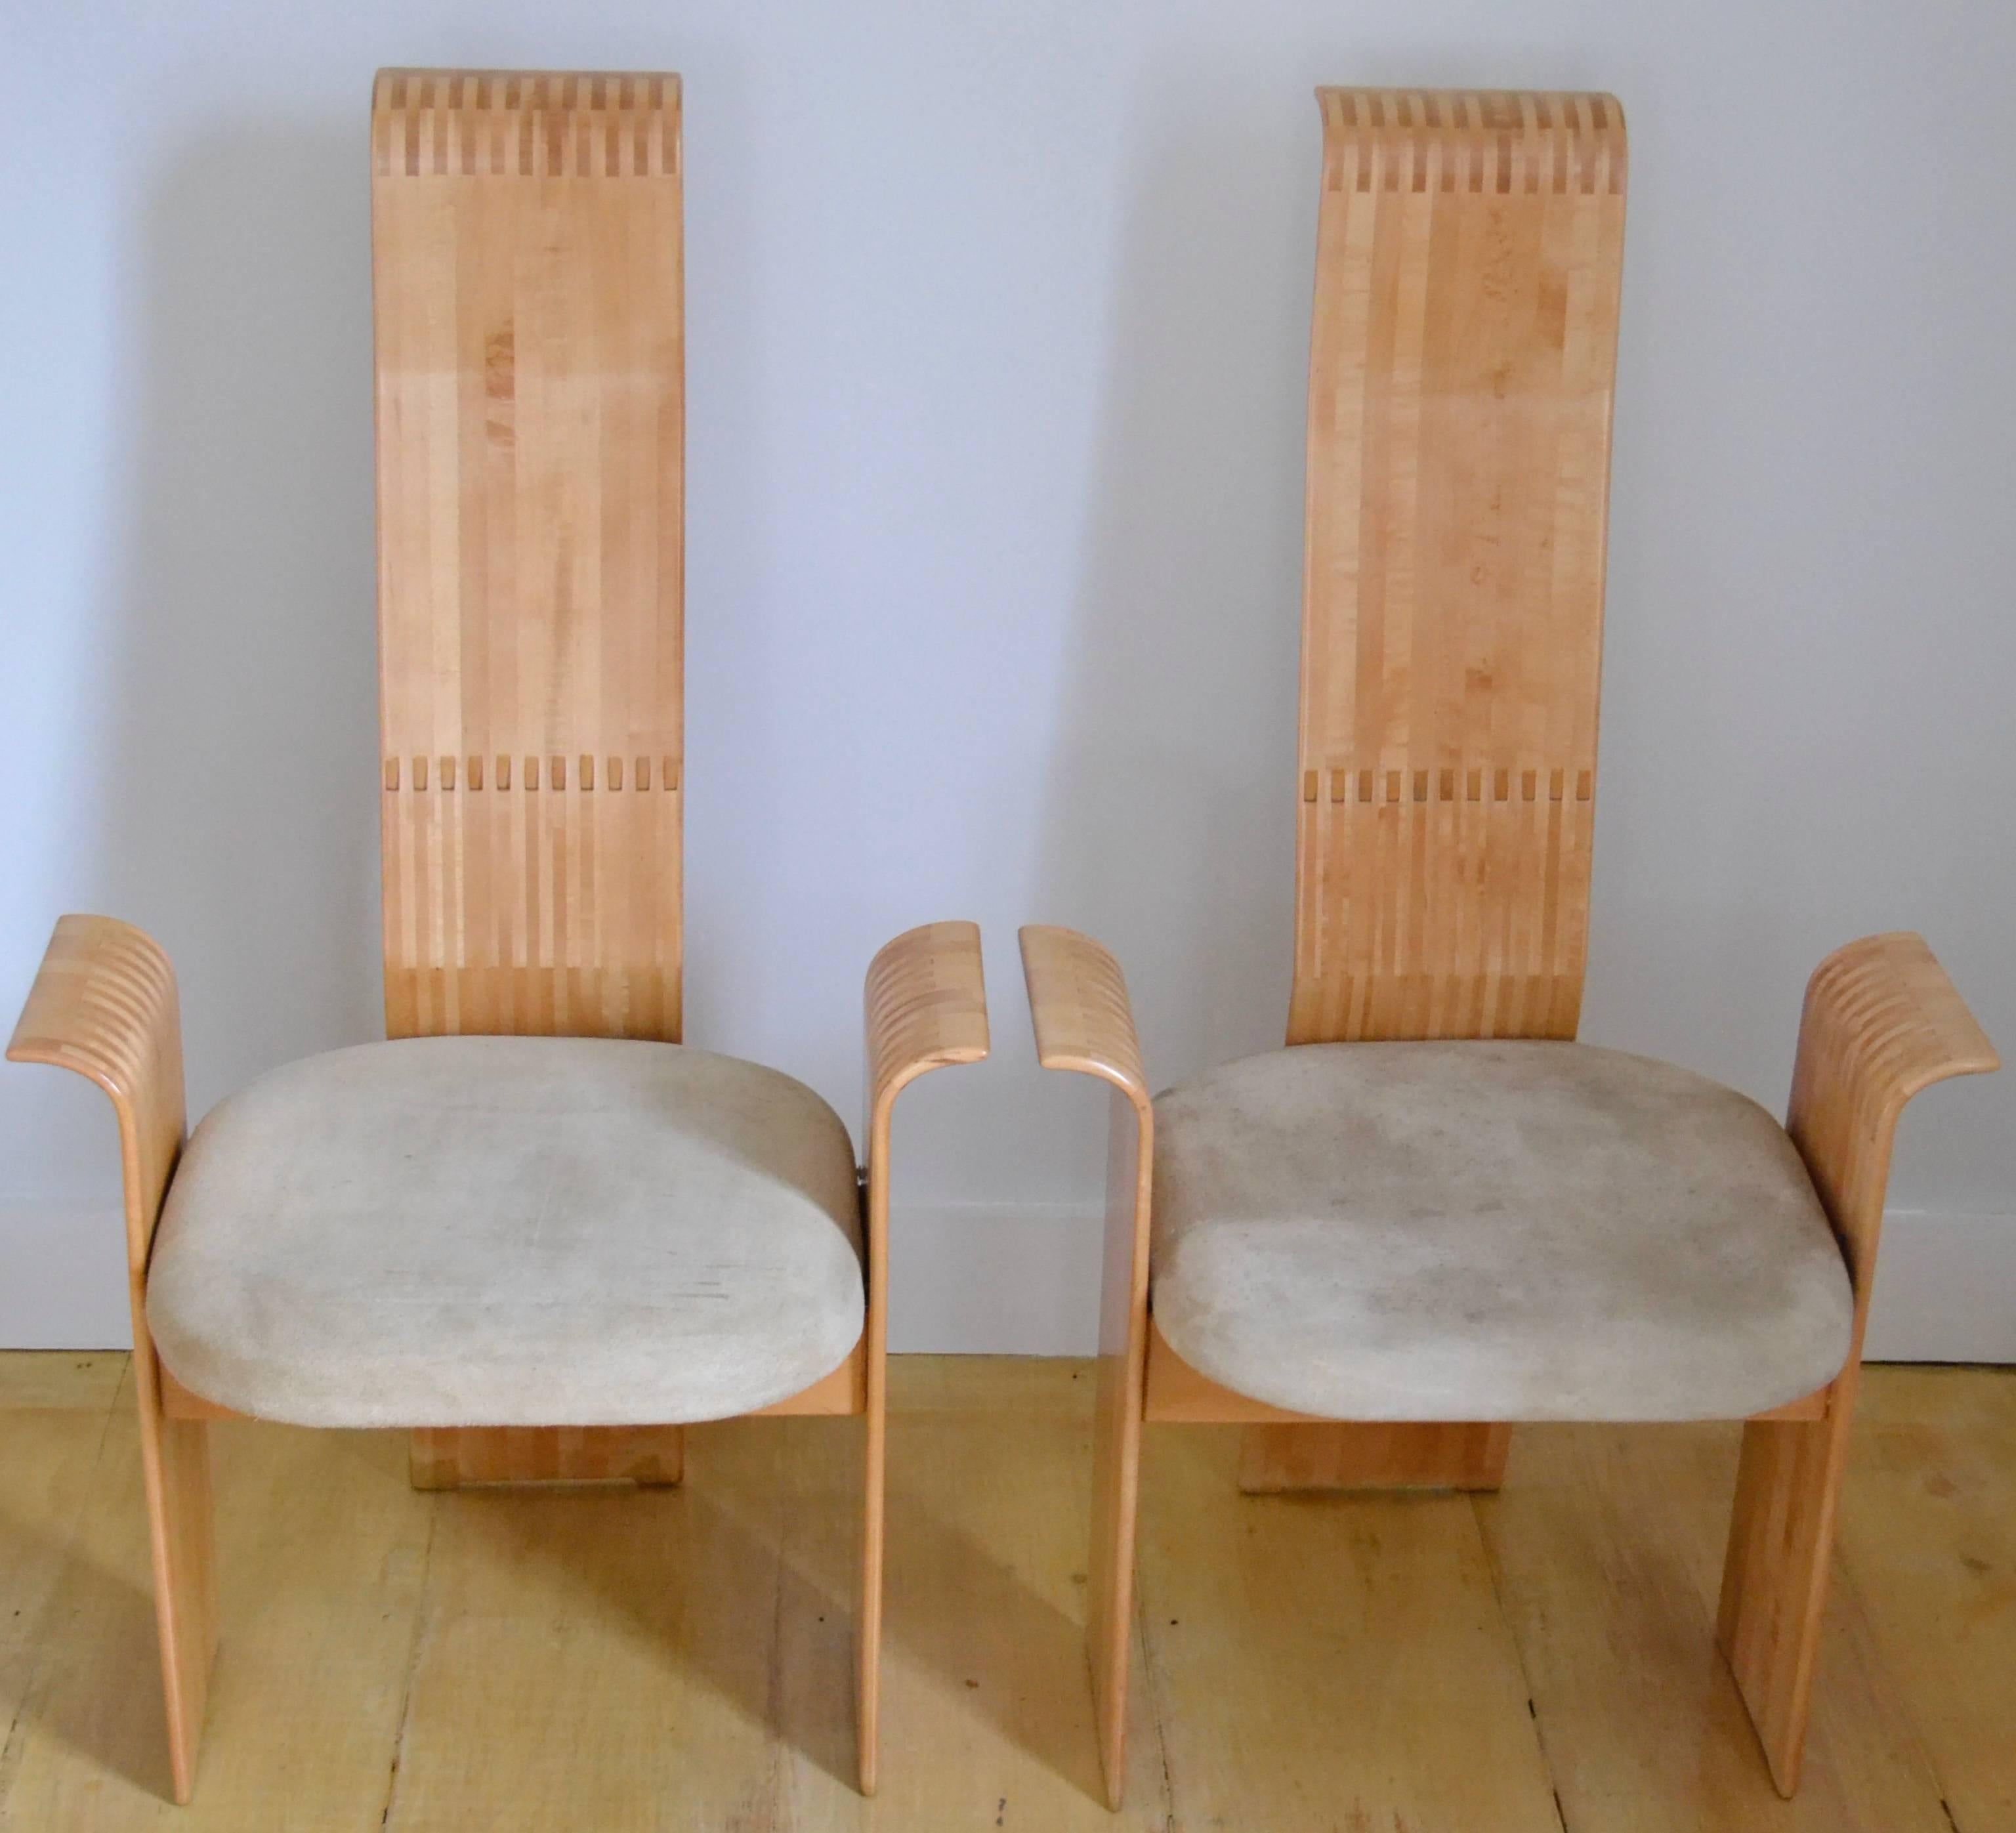 Cherry Berthold Schwaiger Studio Crafted Laminated Chairs Signed and Dated 1985 